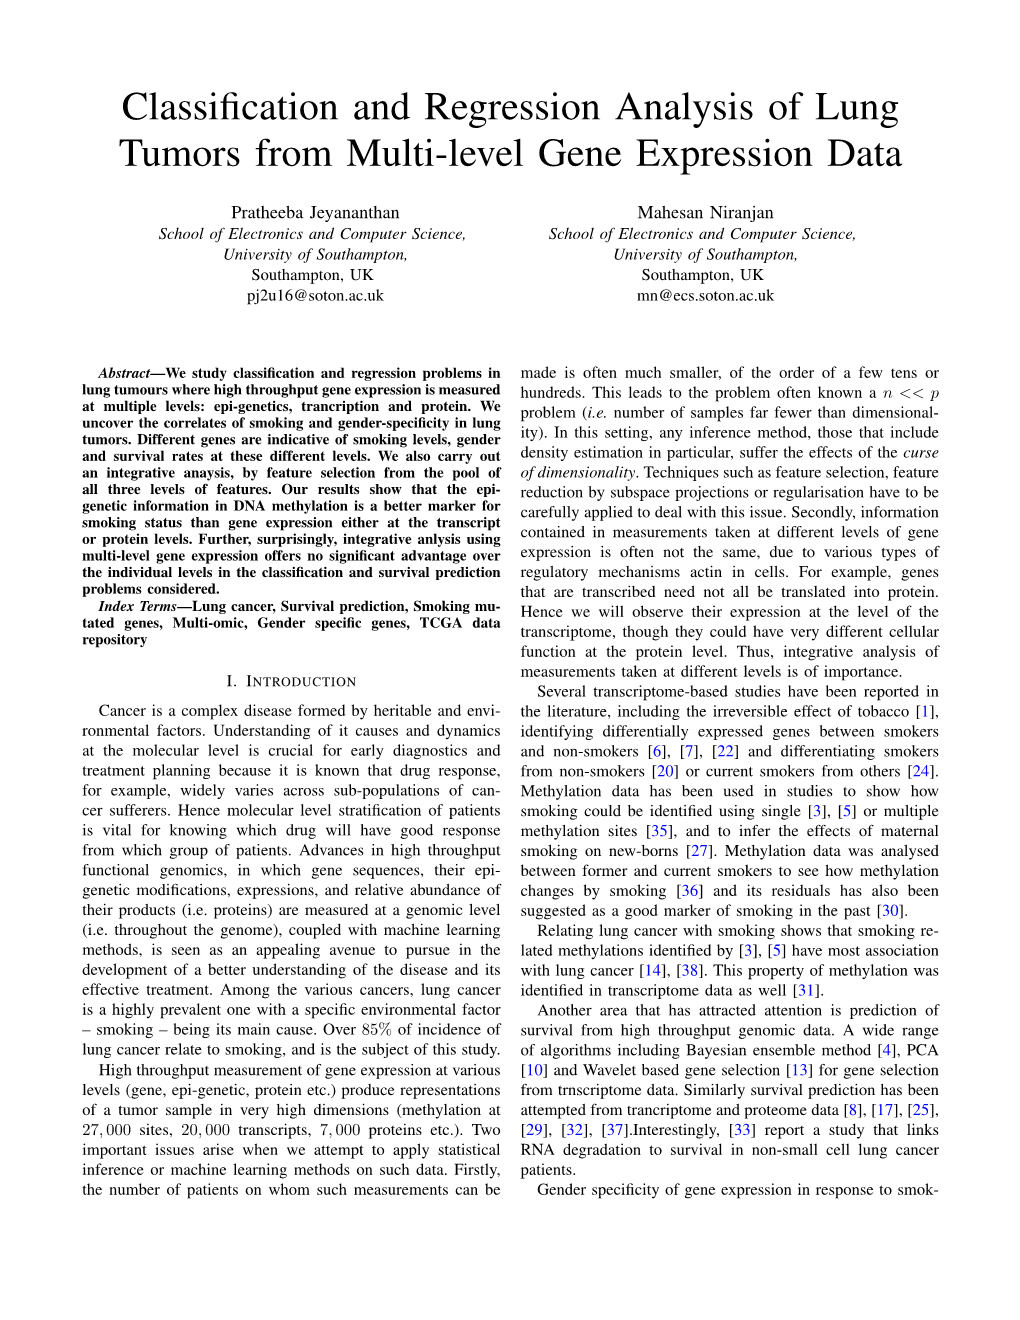 Classification and Regression Analysis of Lung Tumors from Multi